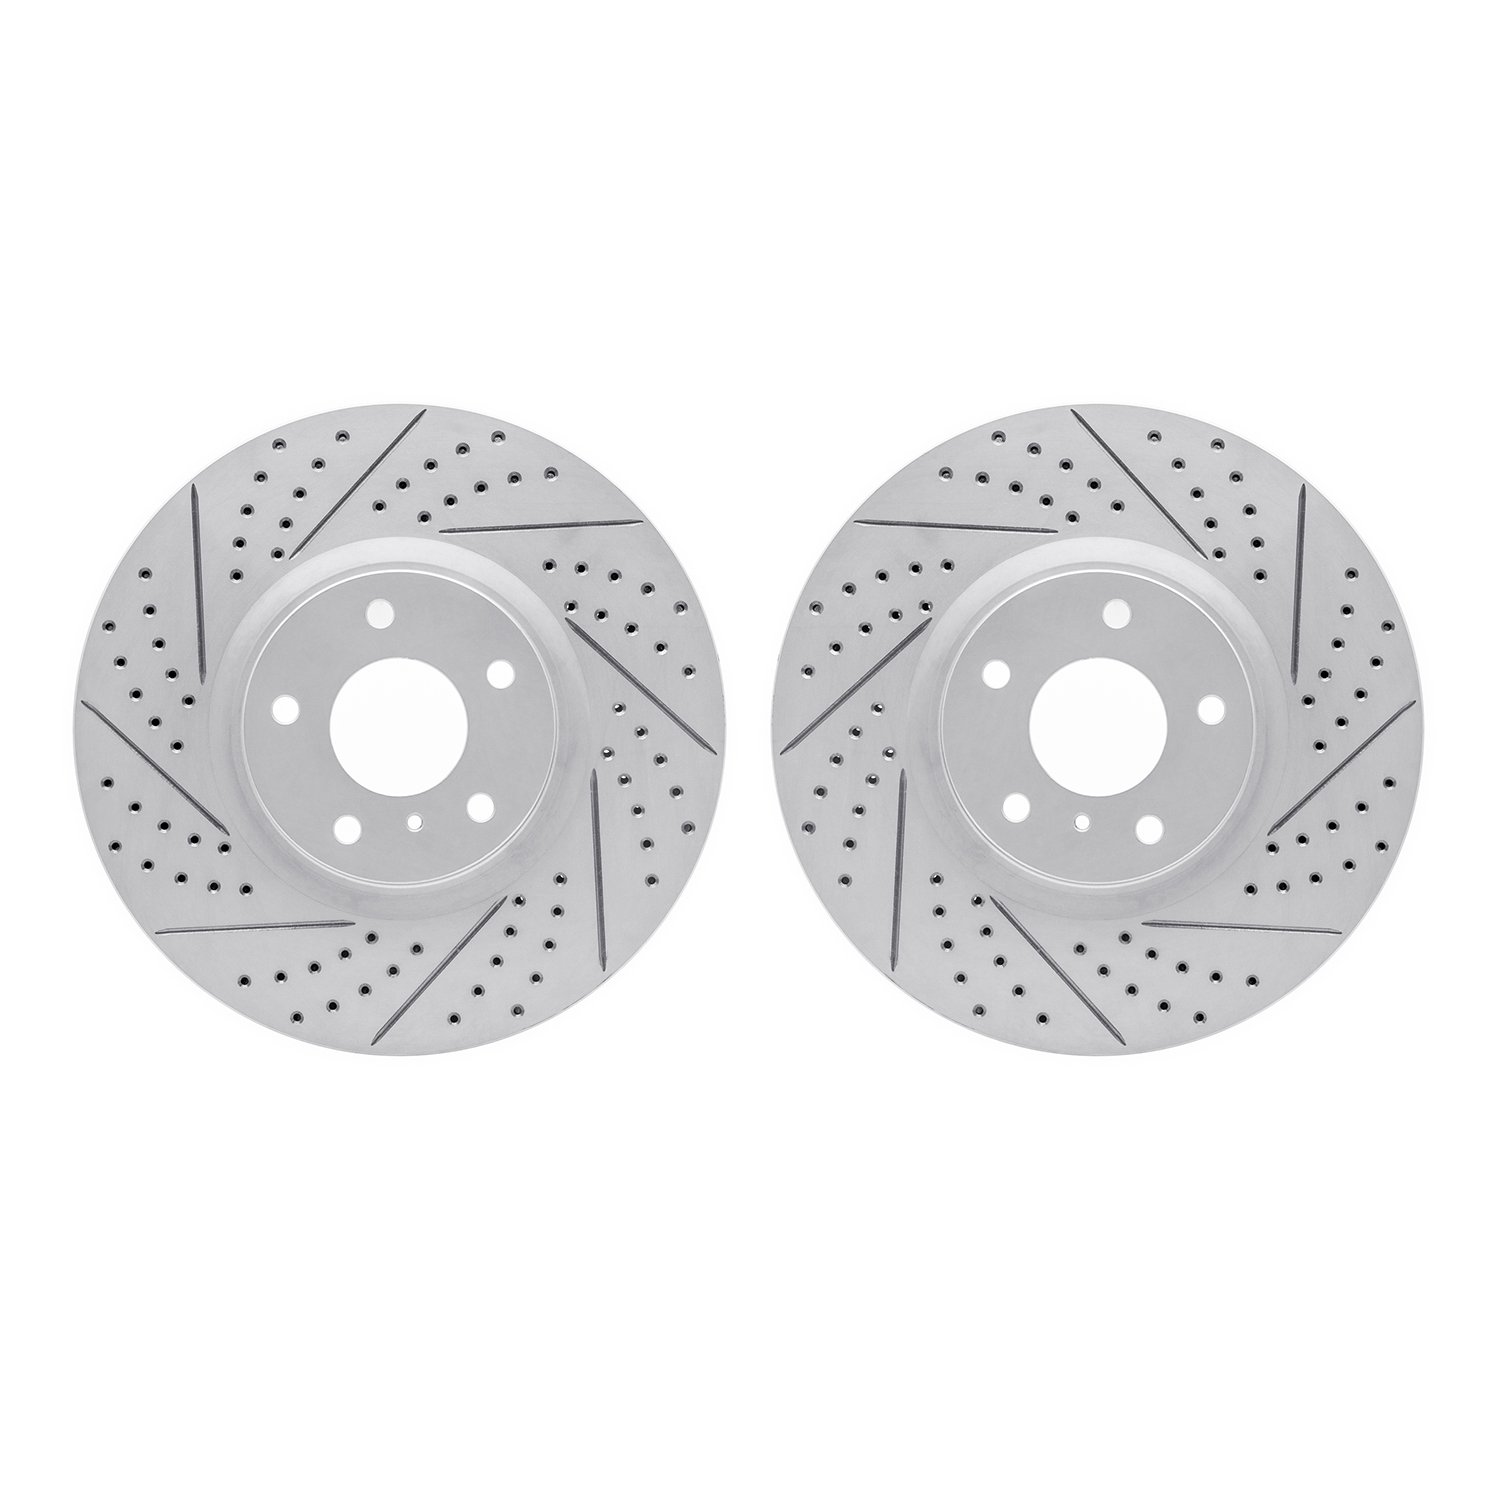 2002-68004 Geoperformance Drilled/Slotted Brake Rotors, 2007-2015 Infiniti/Nissan, Position: Front